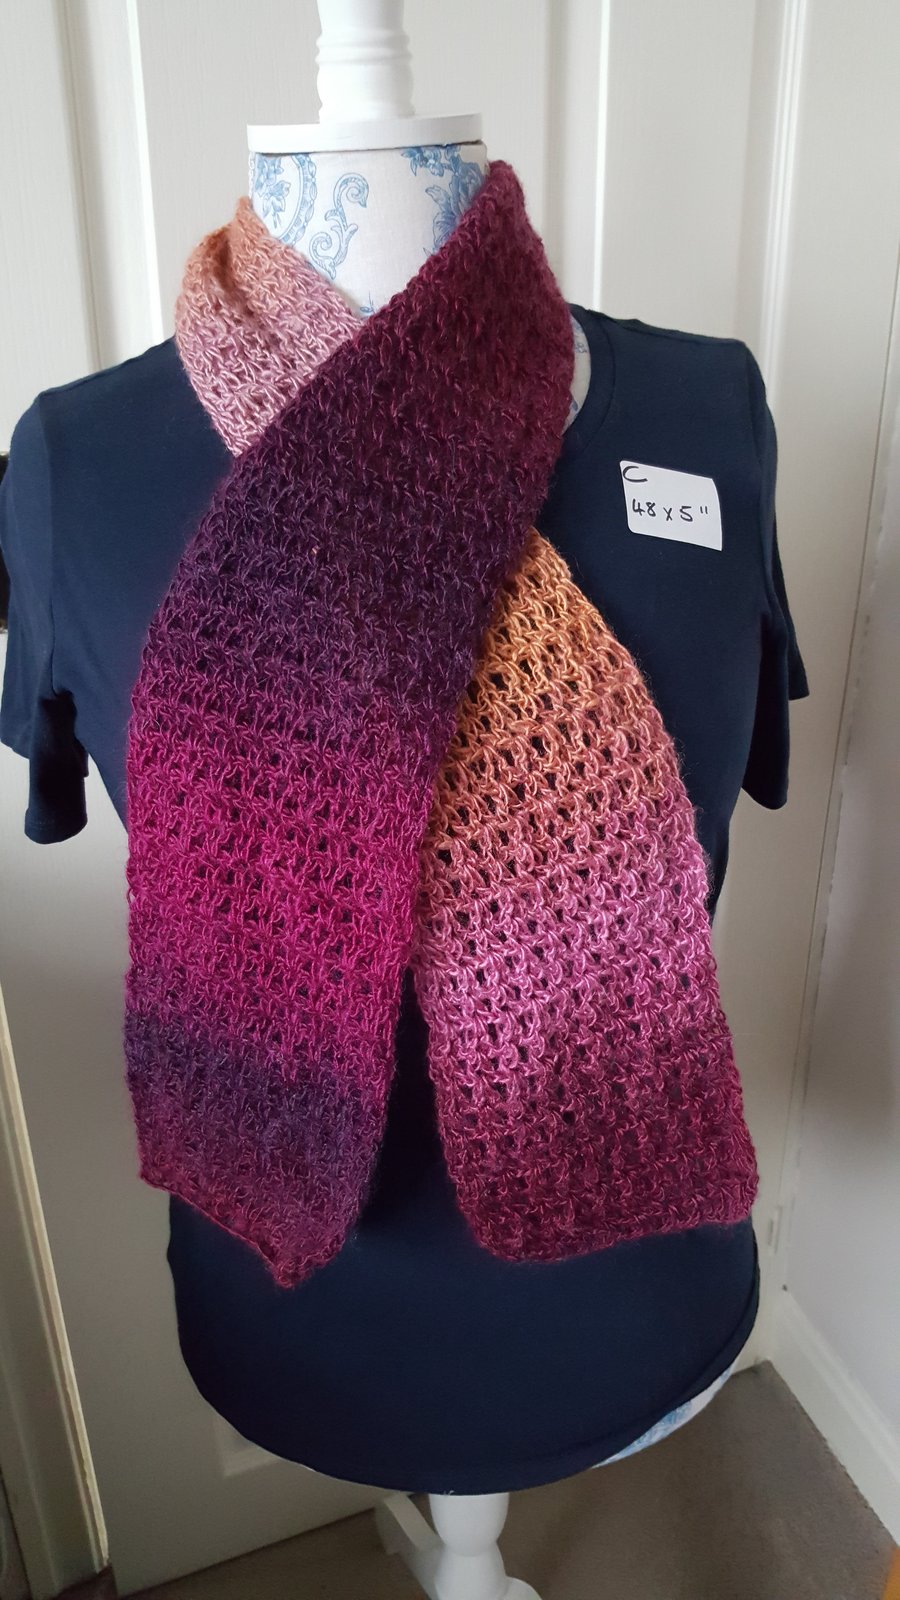 pinks and maroons lightweight lacy crocheted scarf, 48 x 5 inches